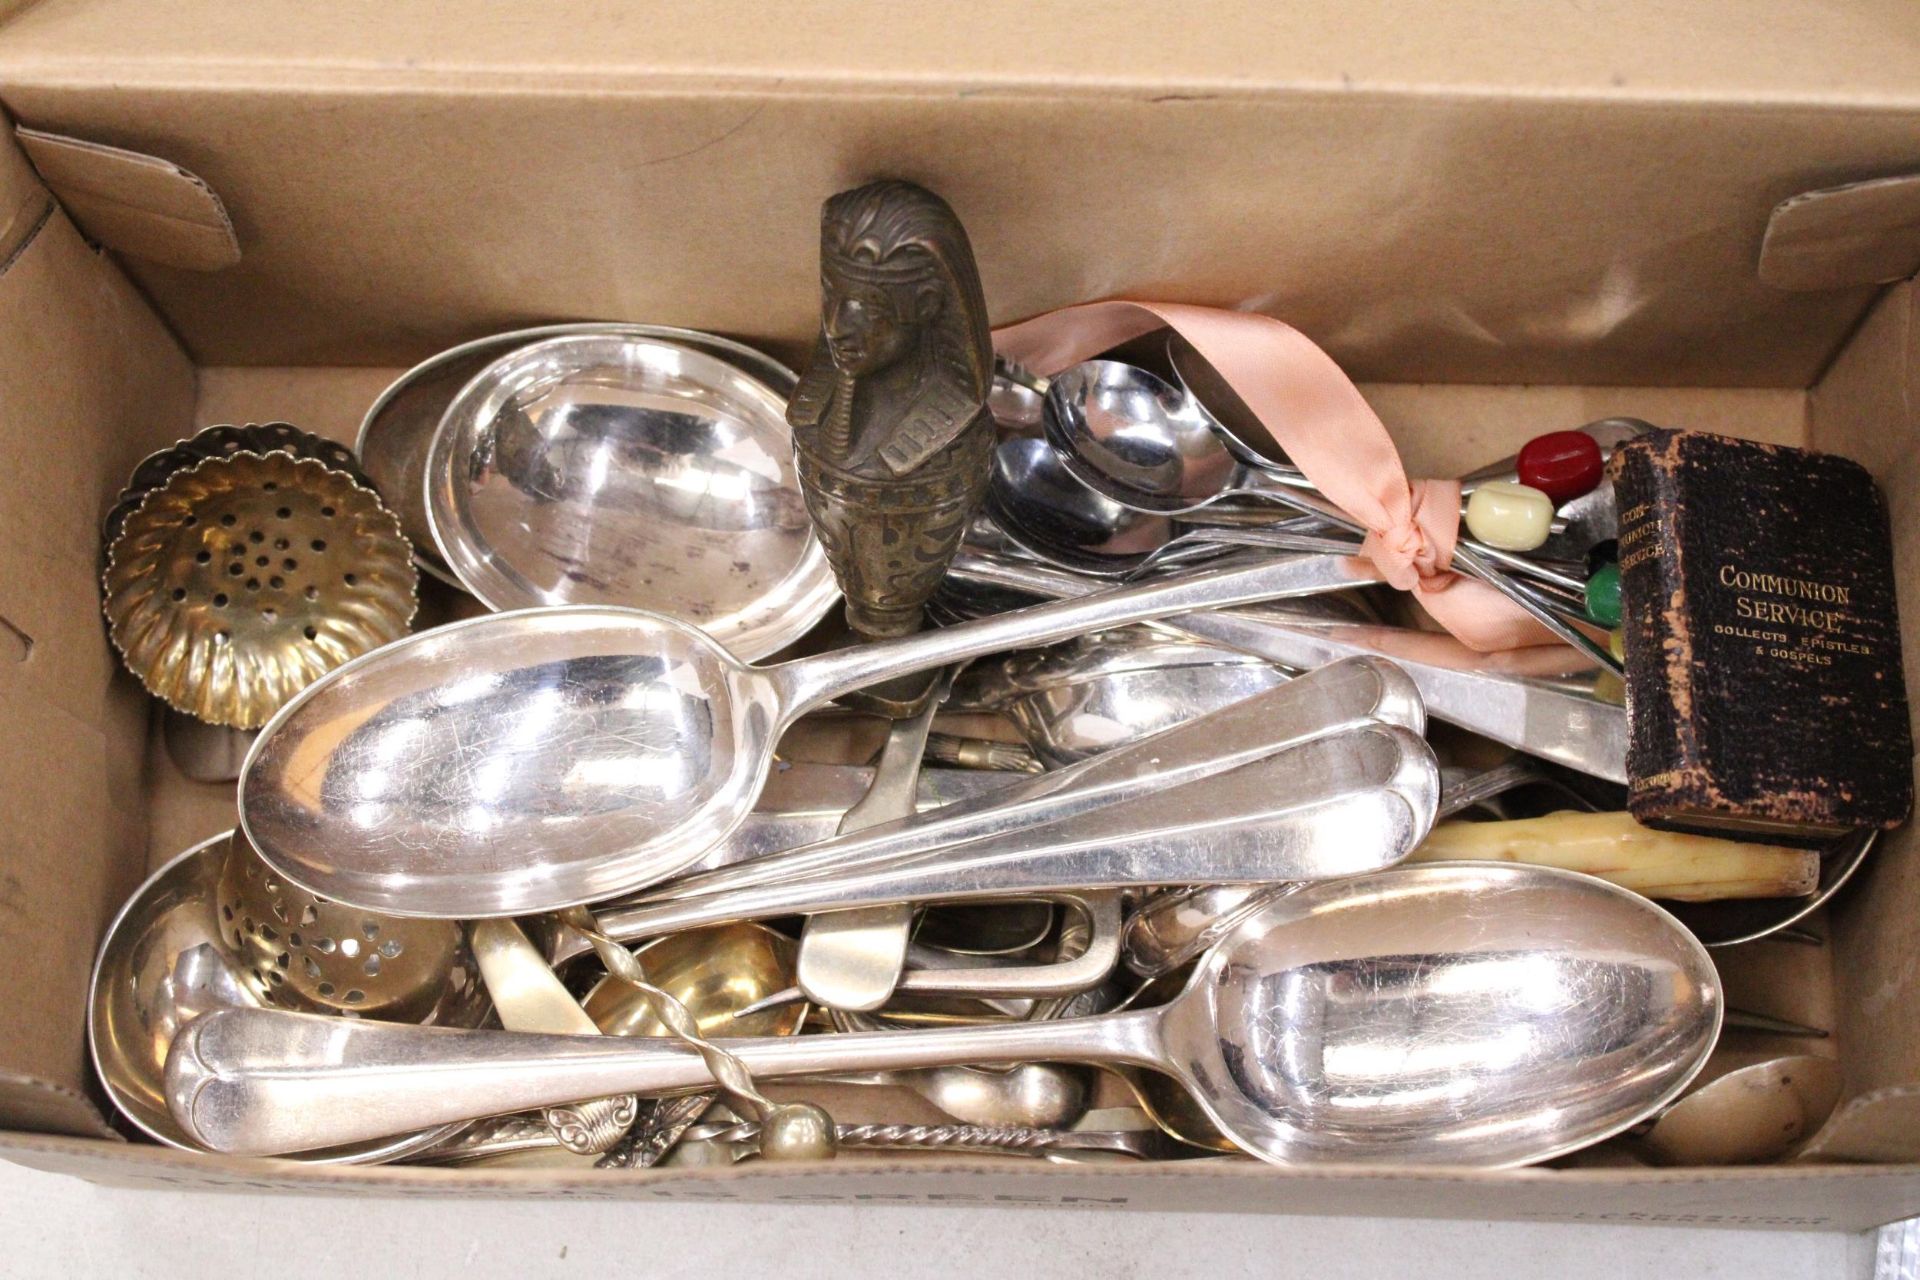 A QUANTITY OF VINTAGE FLATWARE TO INCLUDE LADELS, MUFFIN FORK, SUGAR SIFTERS, SPOONS, ETC - Image 2 of 5